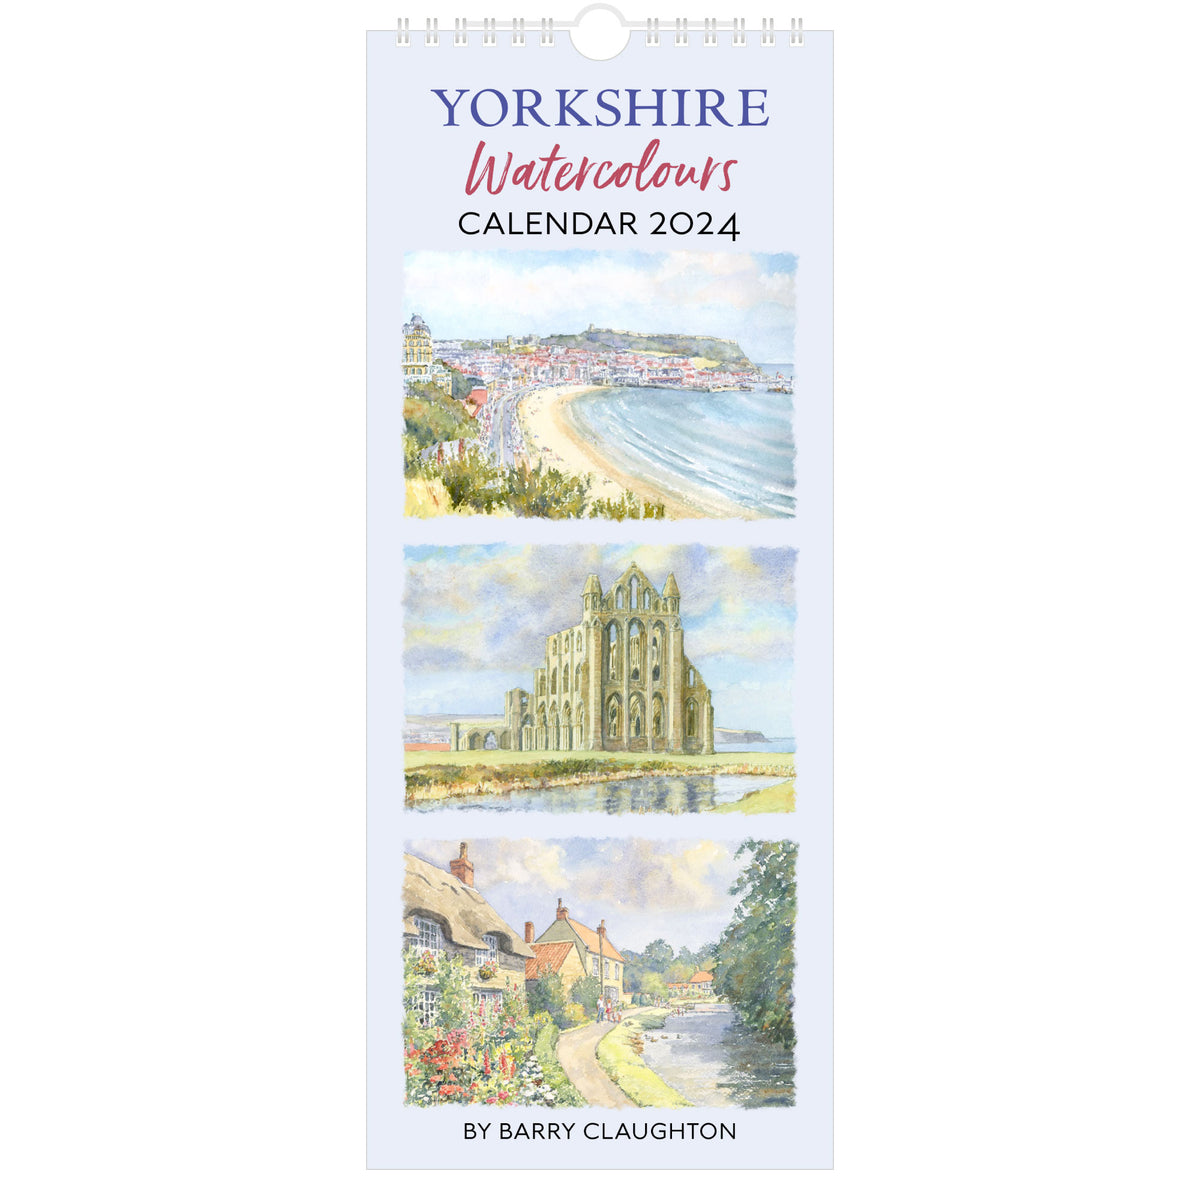 Yorkshire Watercolours Calendar 2024 | Great Stuff from Cardtoons